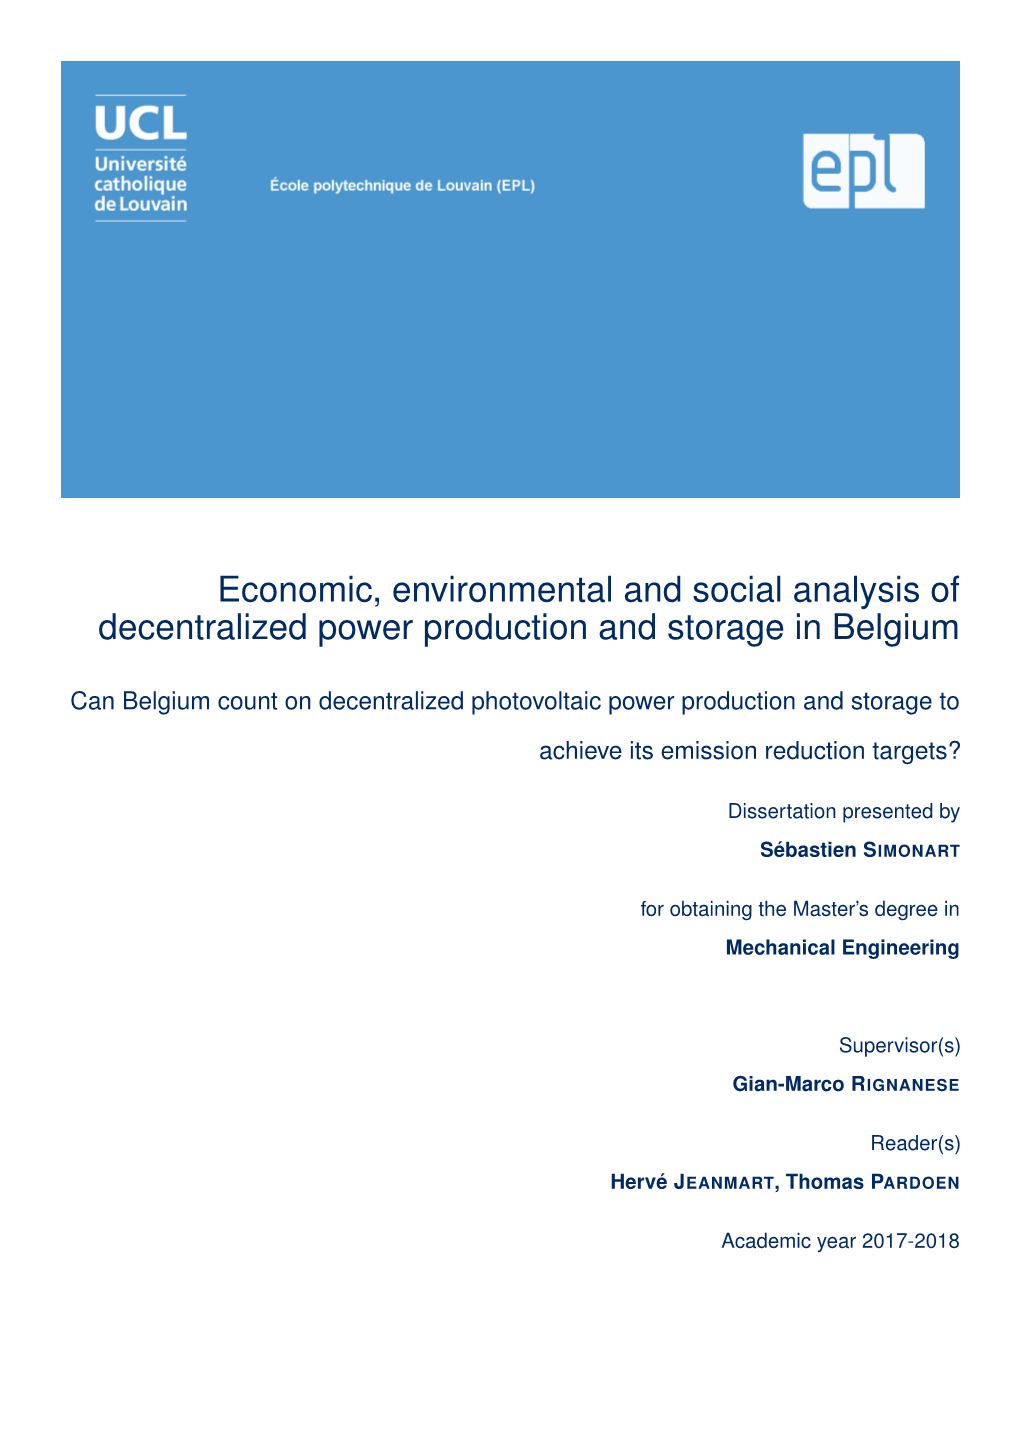 Economic, Environmental and Social Analysis of Decentralized Power Production and Storage in Belgium